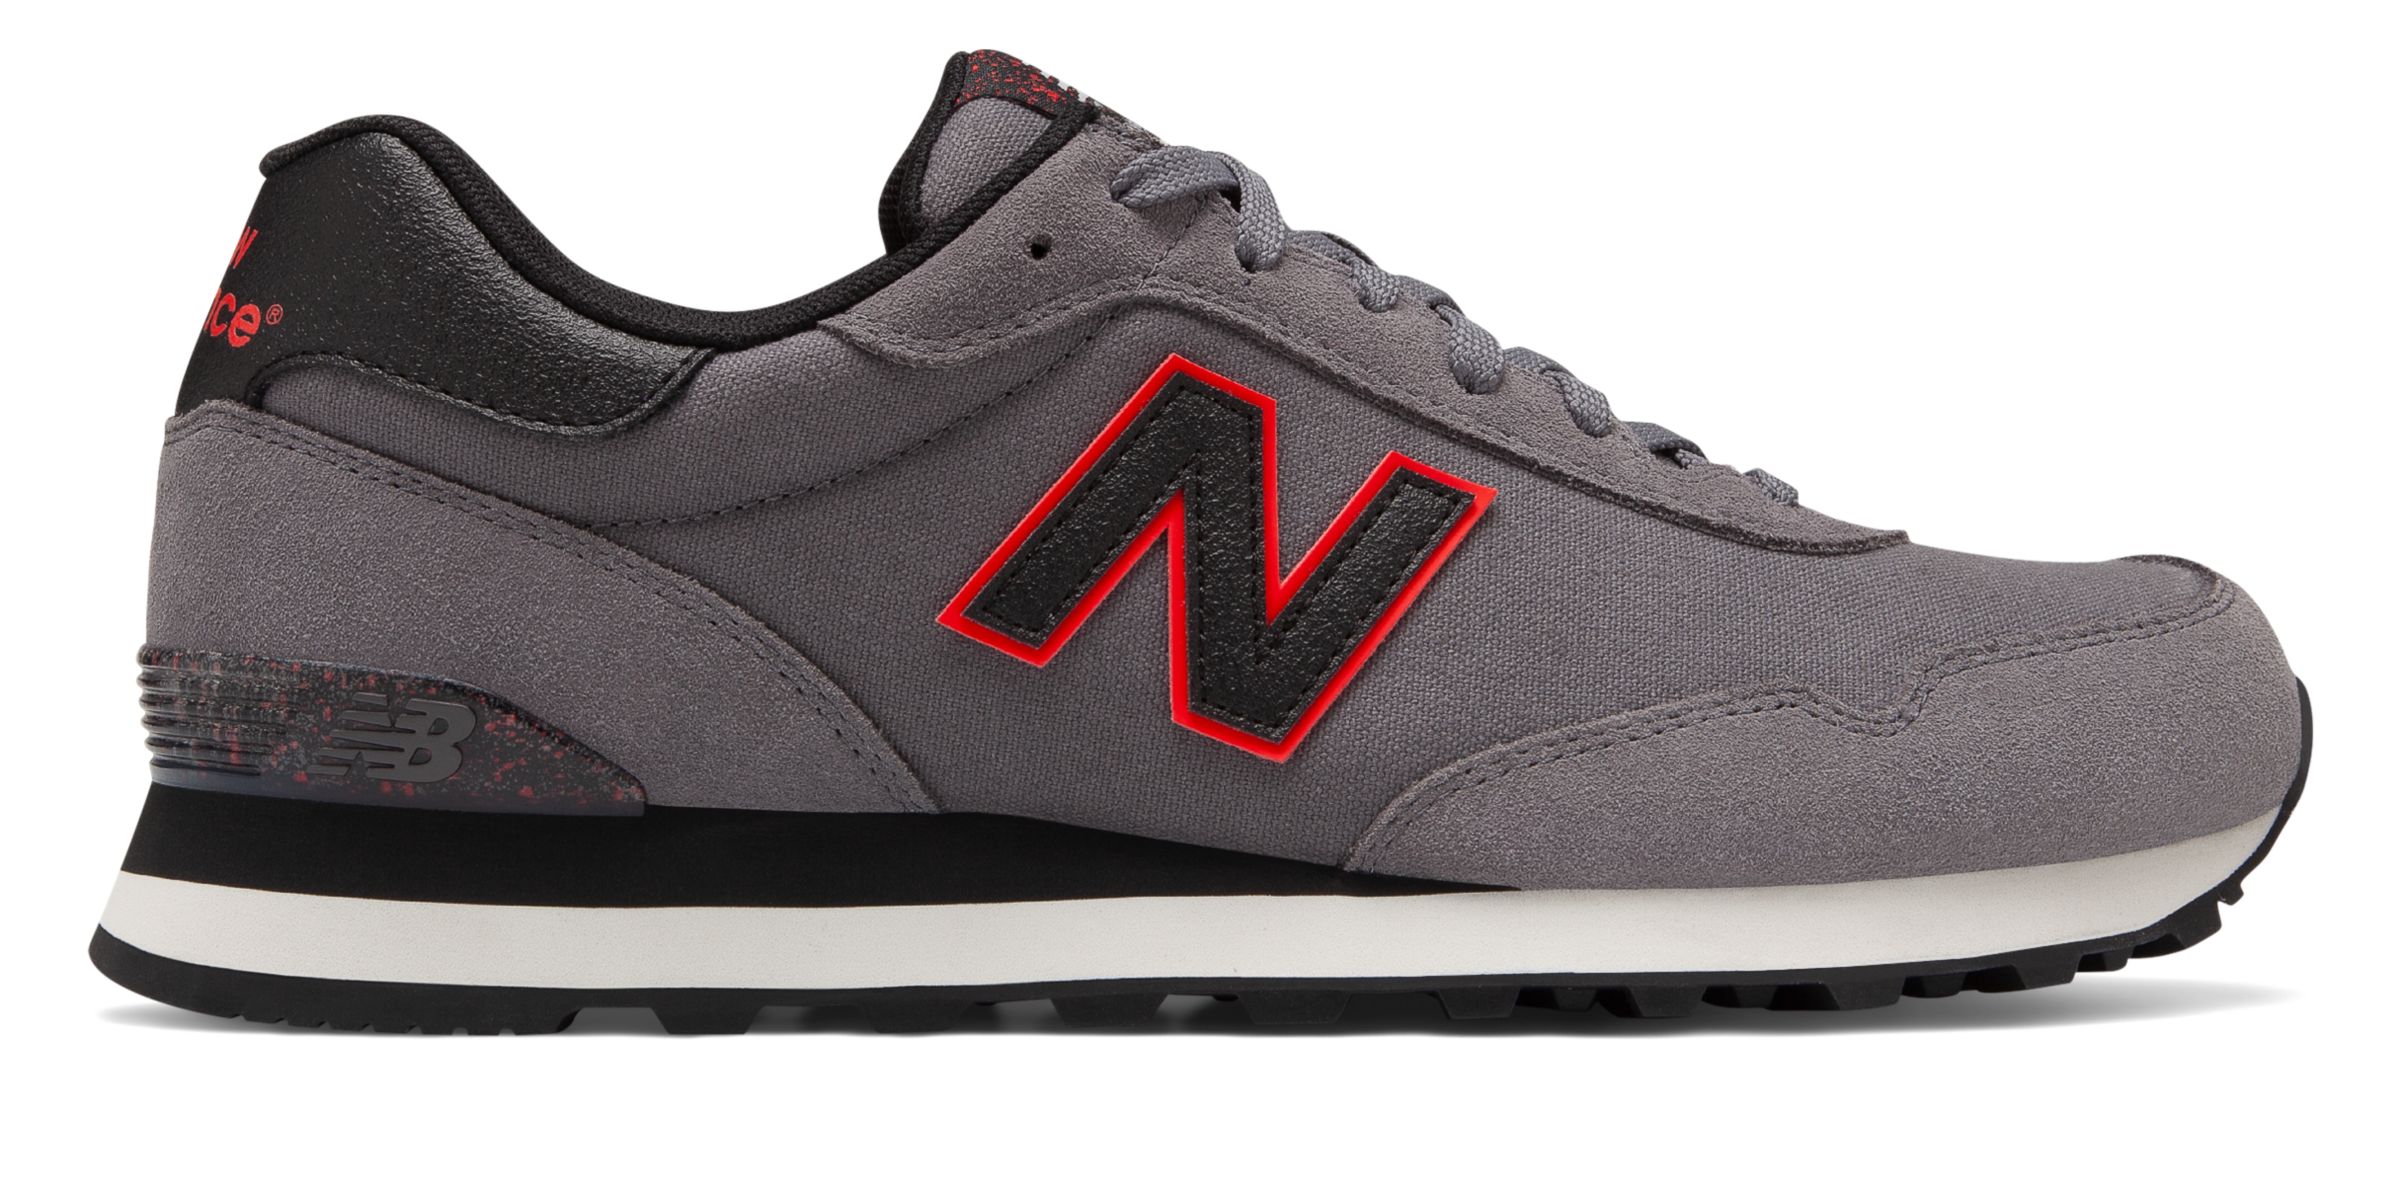 New Balance Men's 515 Shoes Grey with 